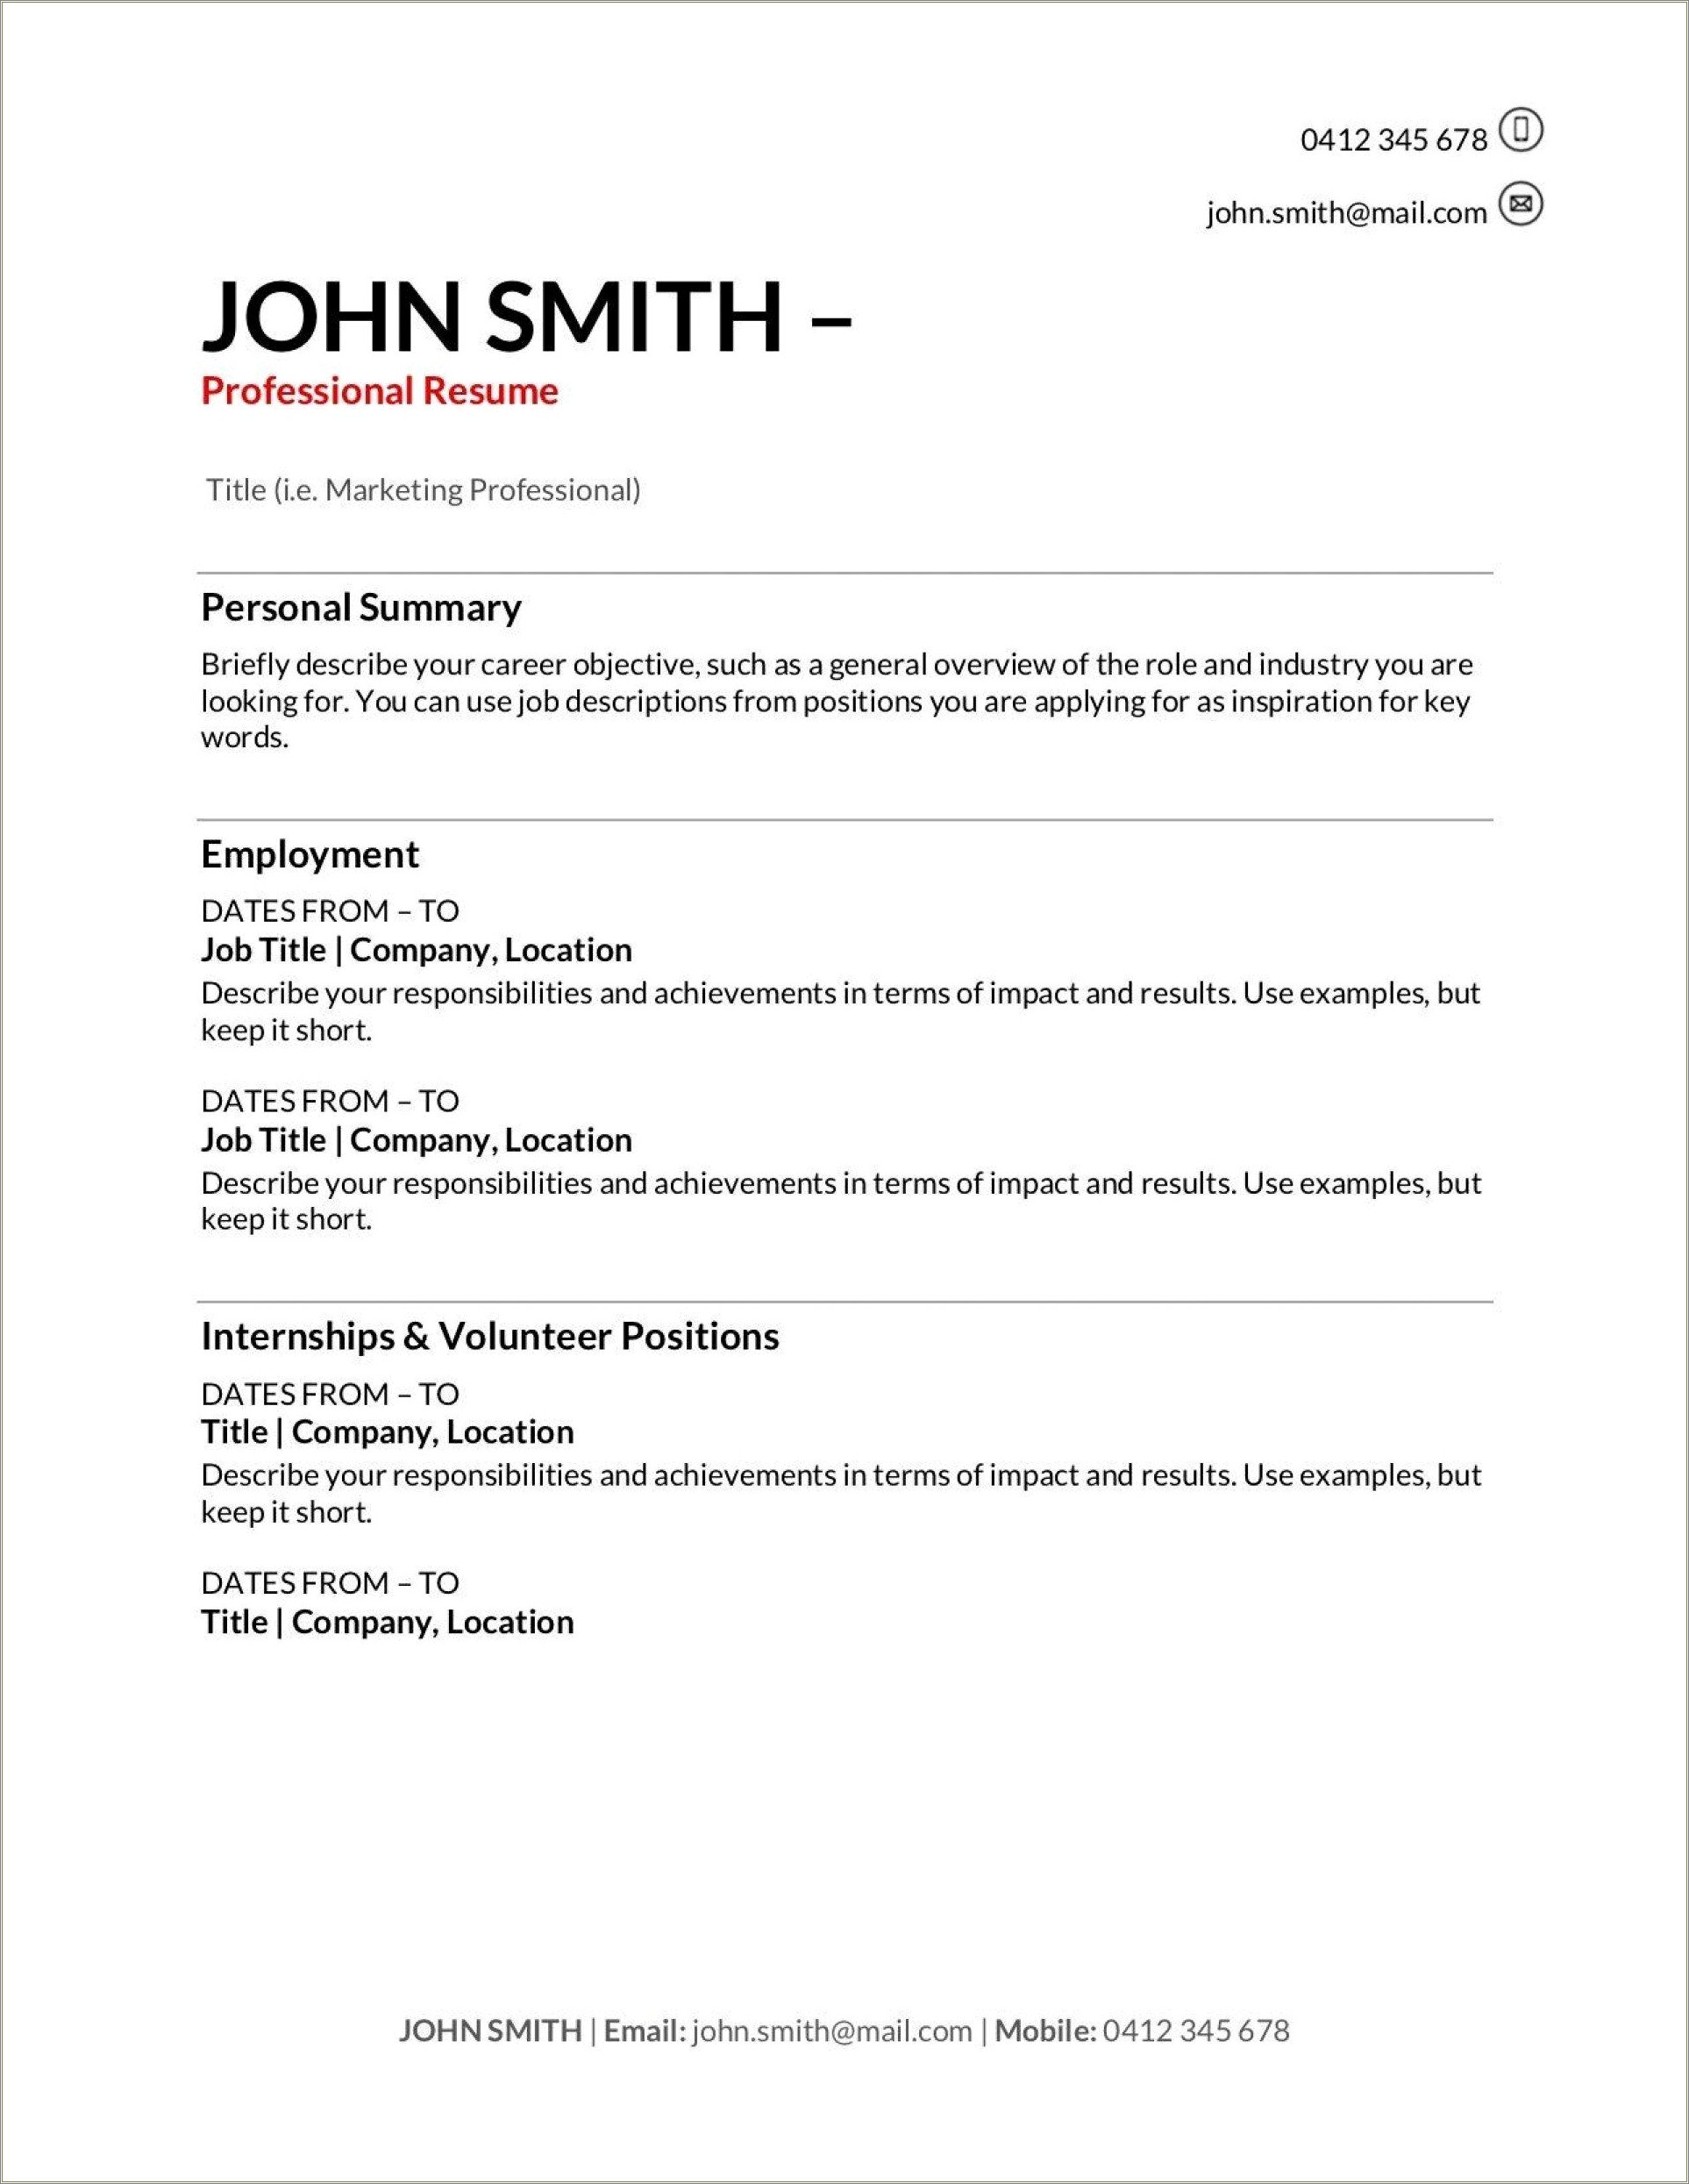 Briefly Describe Your Professional Experience Resume